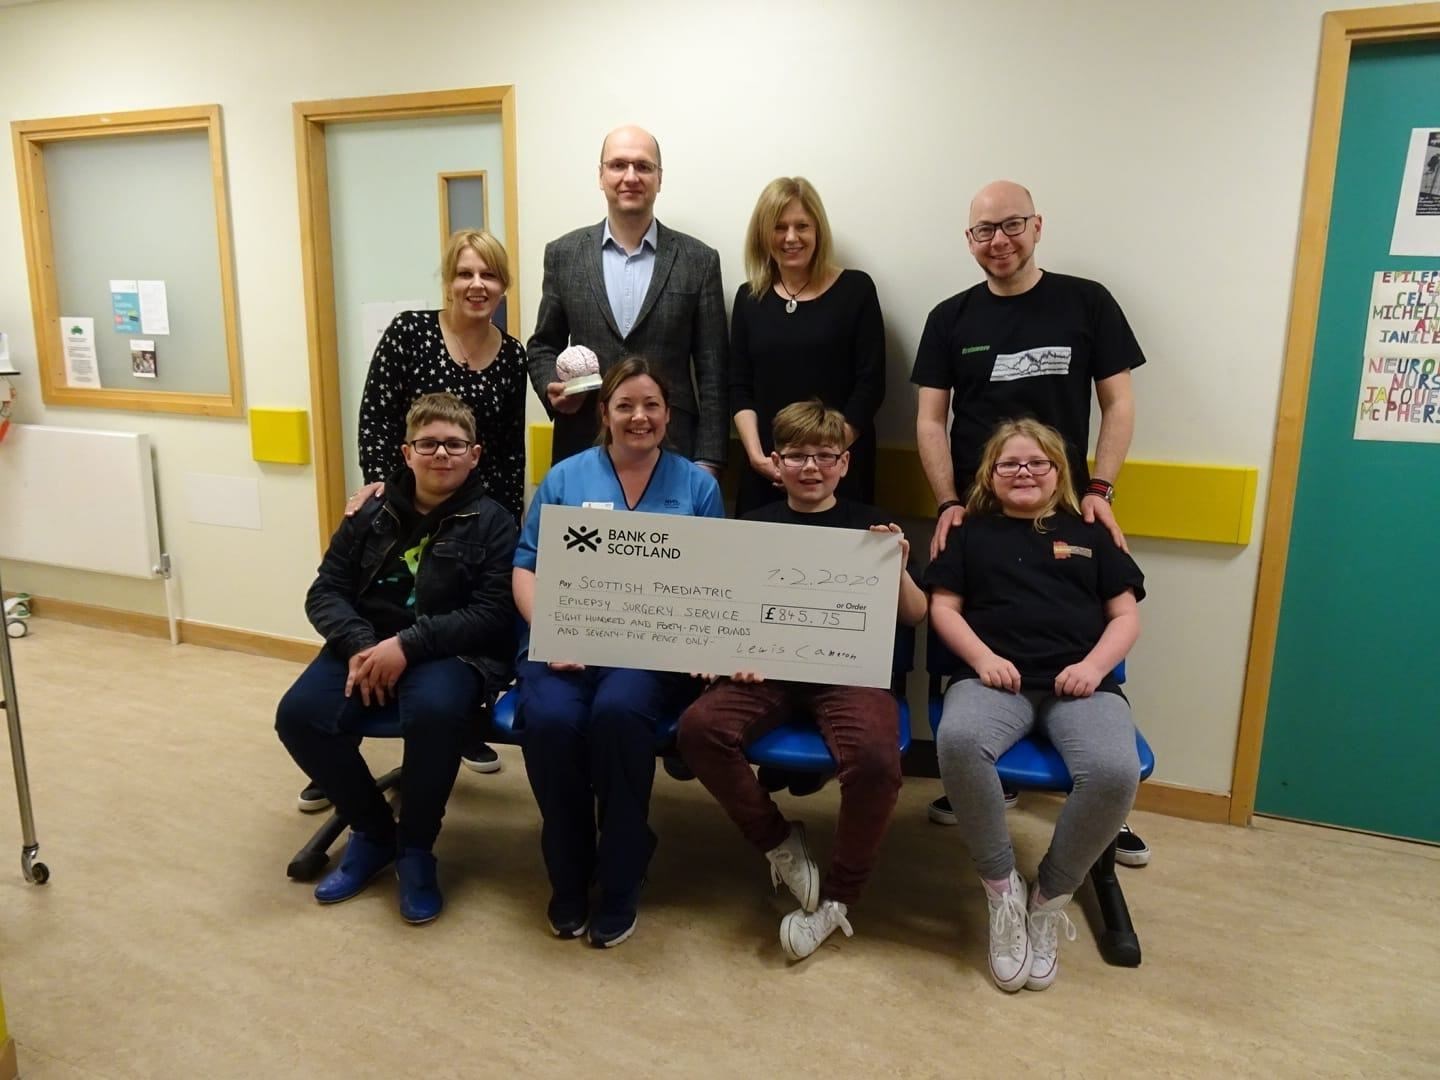 Lewis (front second right) hands over his cheque to Epilepsy surgery nurse Janice Fyall. Joining him is brother Fraser, sister Pearl and (back from left) mum Sarah Roger, neurosurgery specialist Drahoslav Sokol, Dr Ailsa McLellan and dad Garry Cameron.